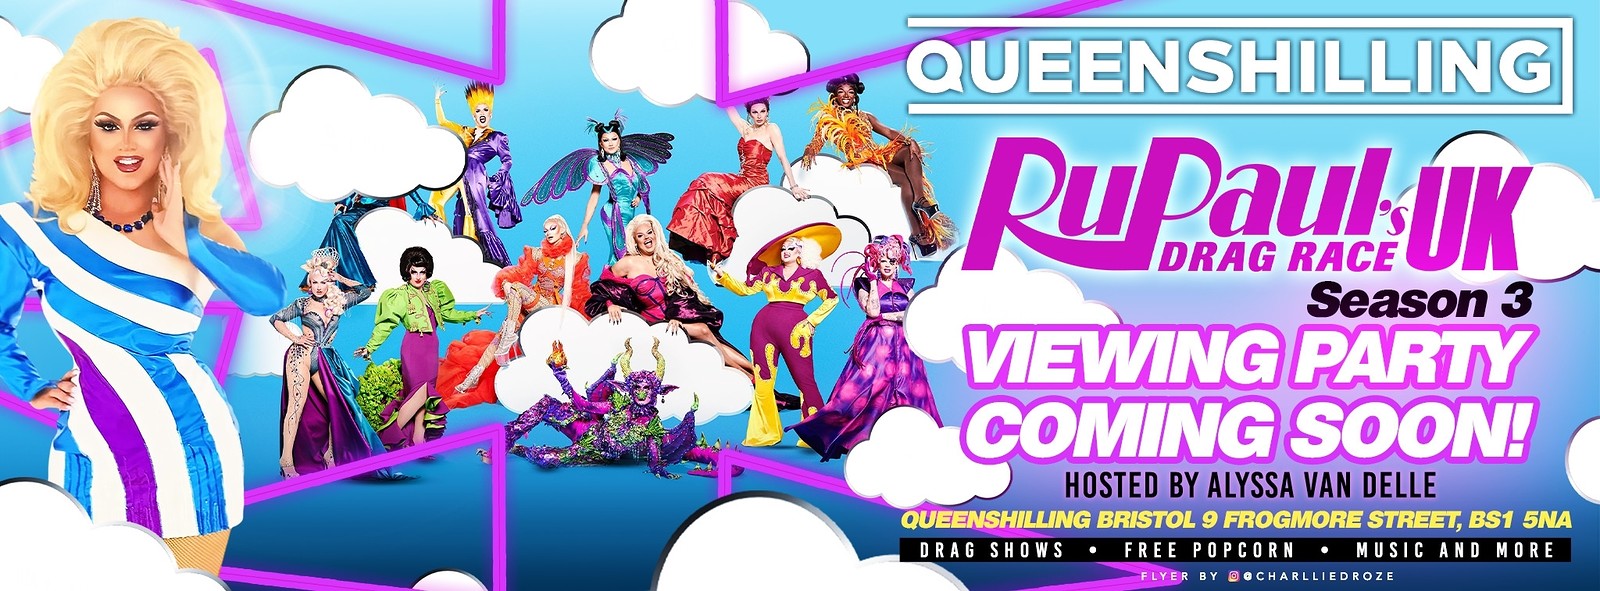 Rupauls drag race UK viewing party at Queenshilling